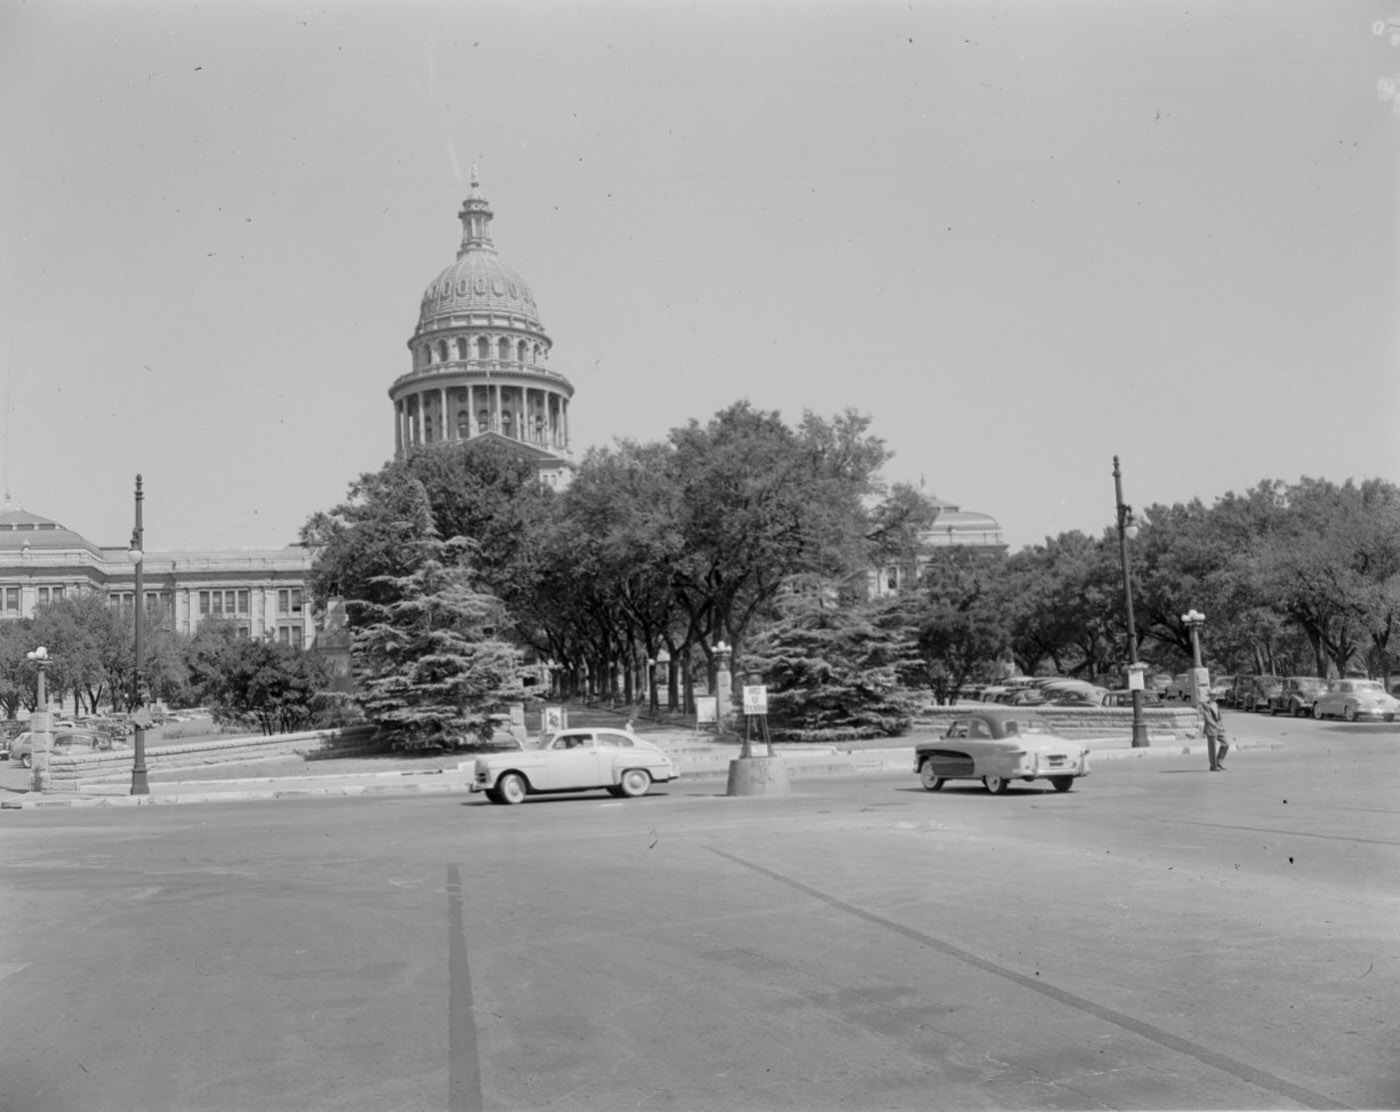 Front View of the Capitol Building in Austin with Trees and Cars, 1954.